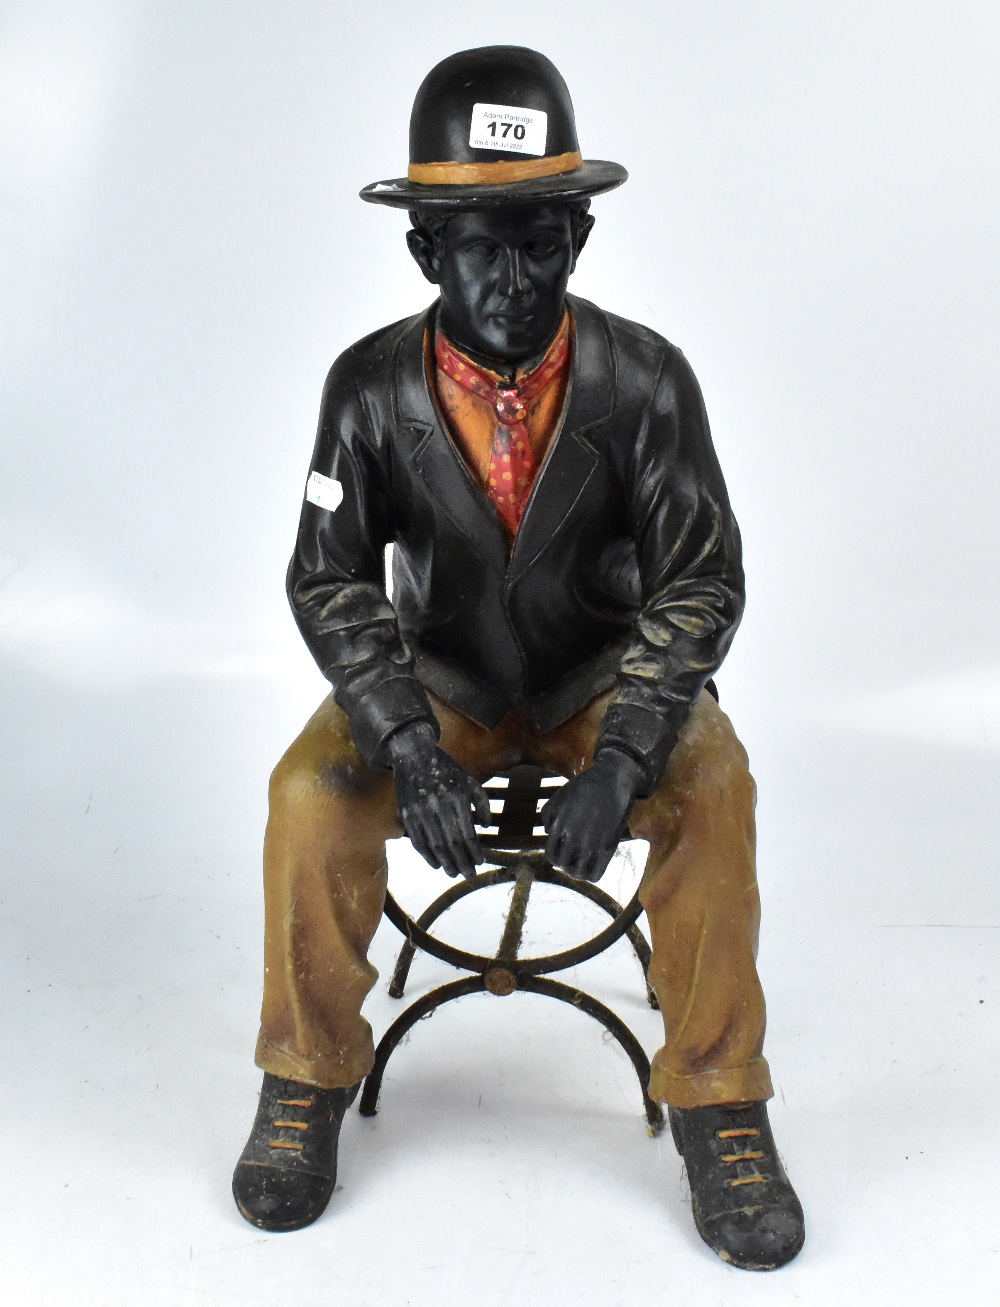 A decorative fibreglass figure of a seated gentleman upon a chair.